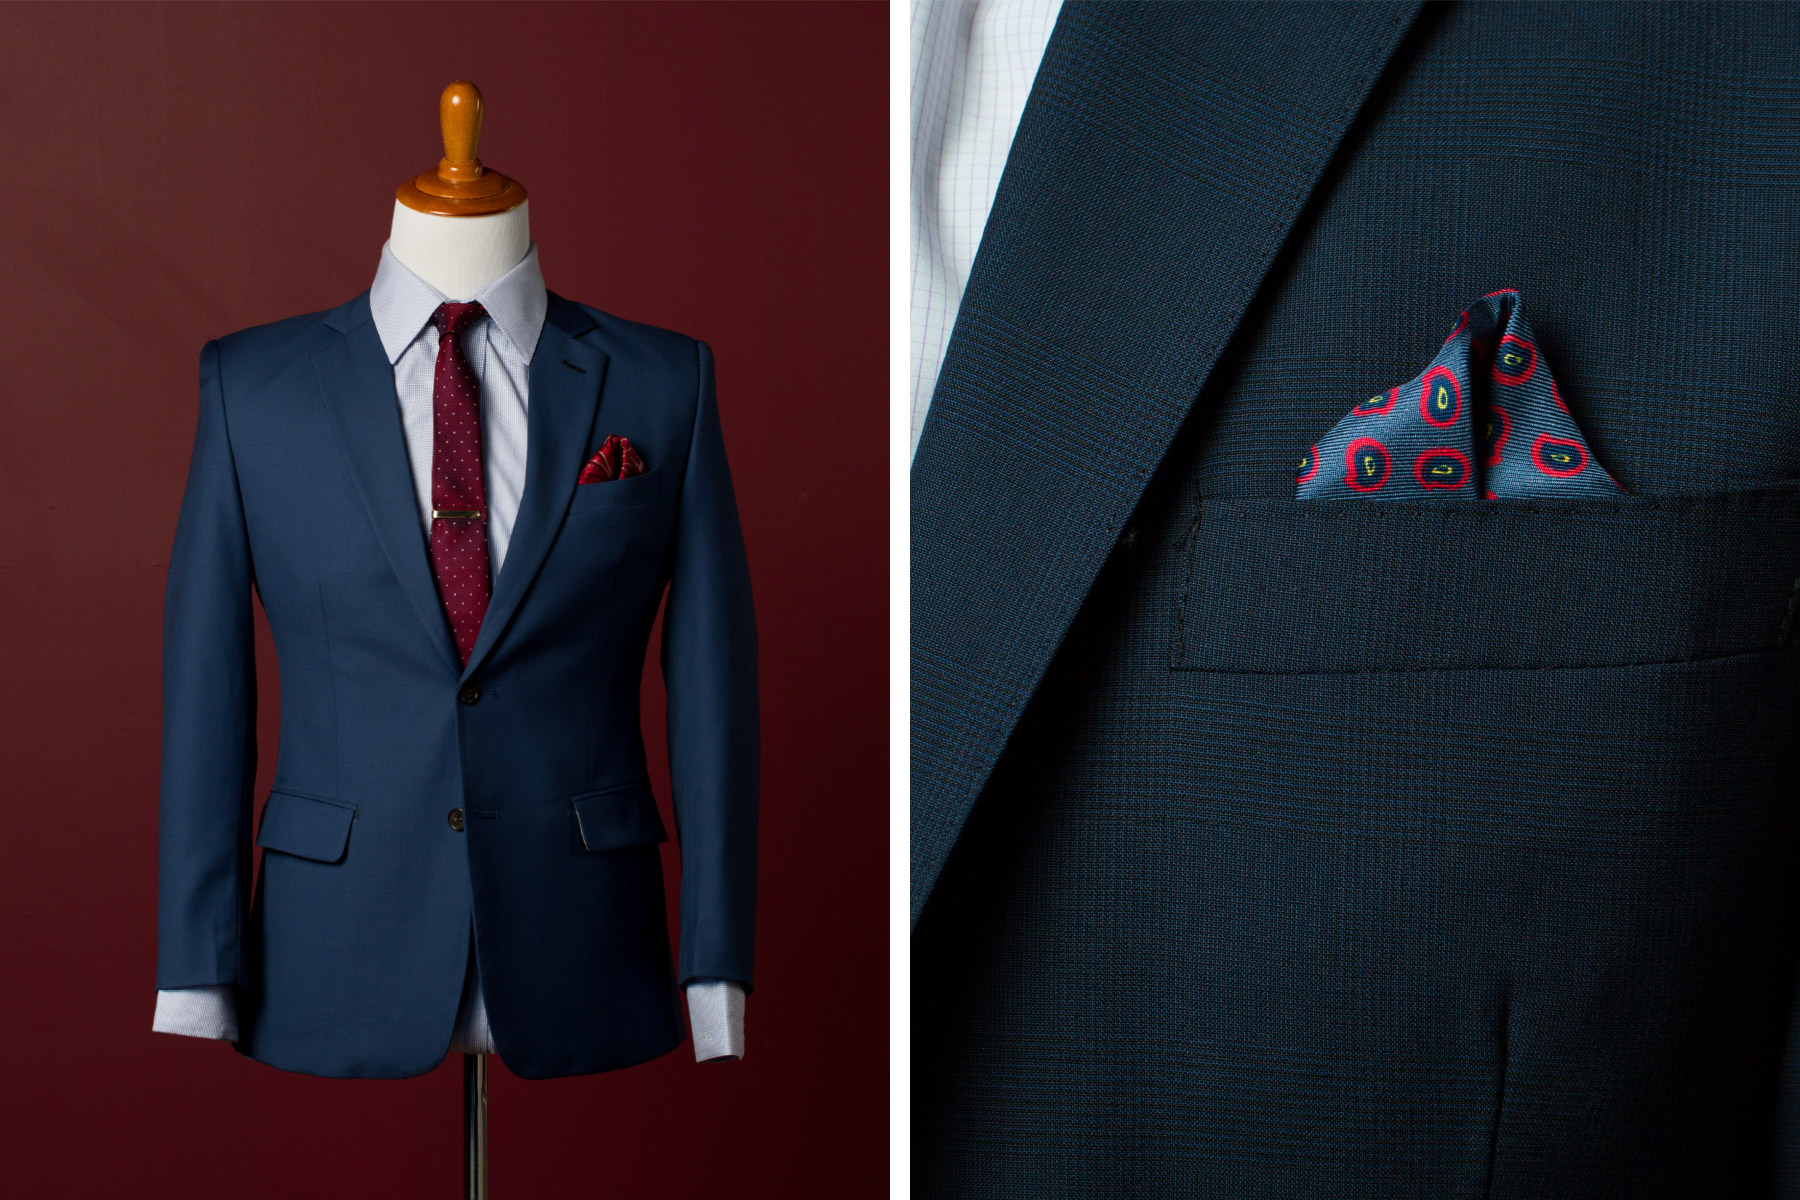 Fuze-Branding-Masculine-Rich-Product-Photography-Bespoke-Suit-Company-Evolution-Of-Style-Suit-Mannequin-Detail-Shot